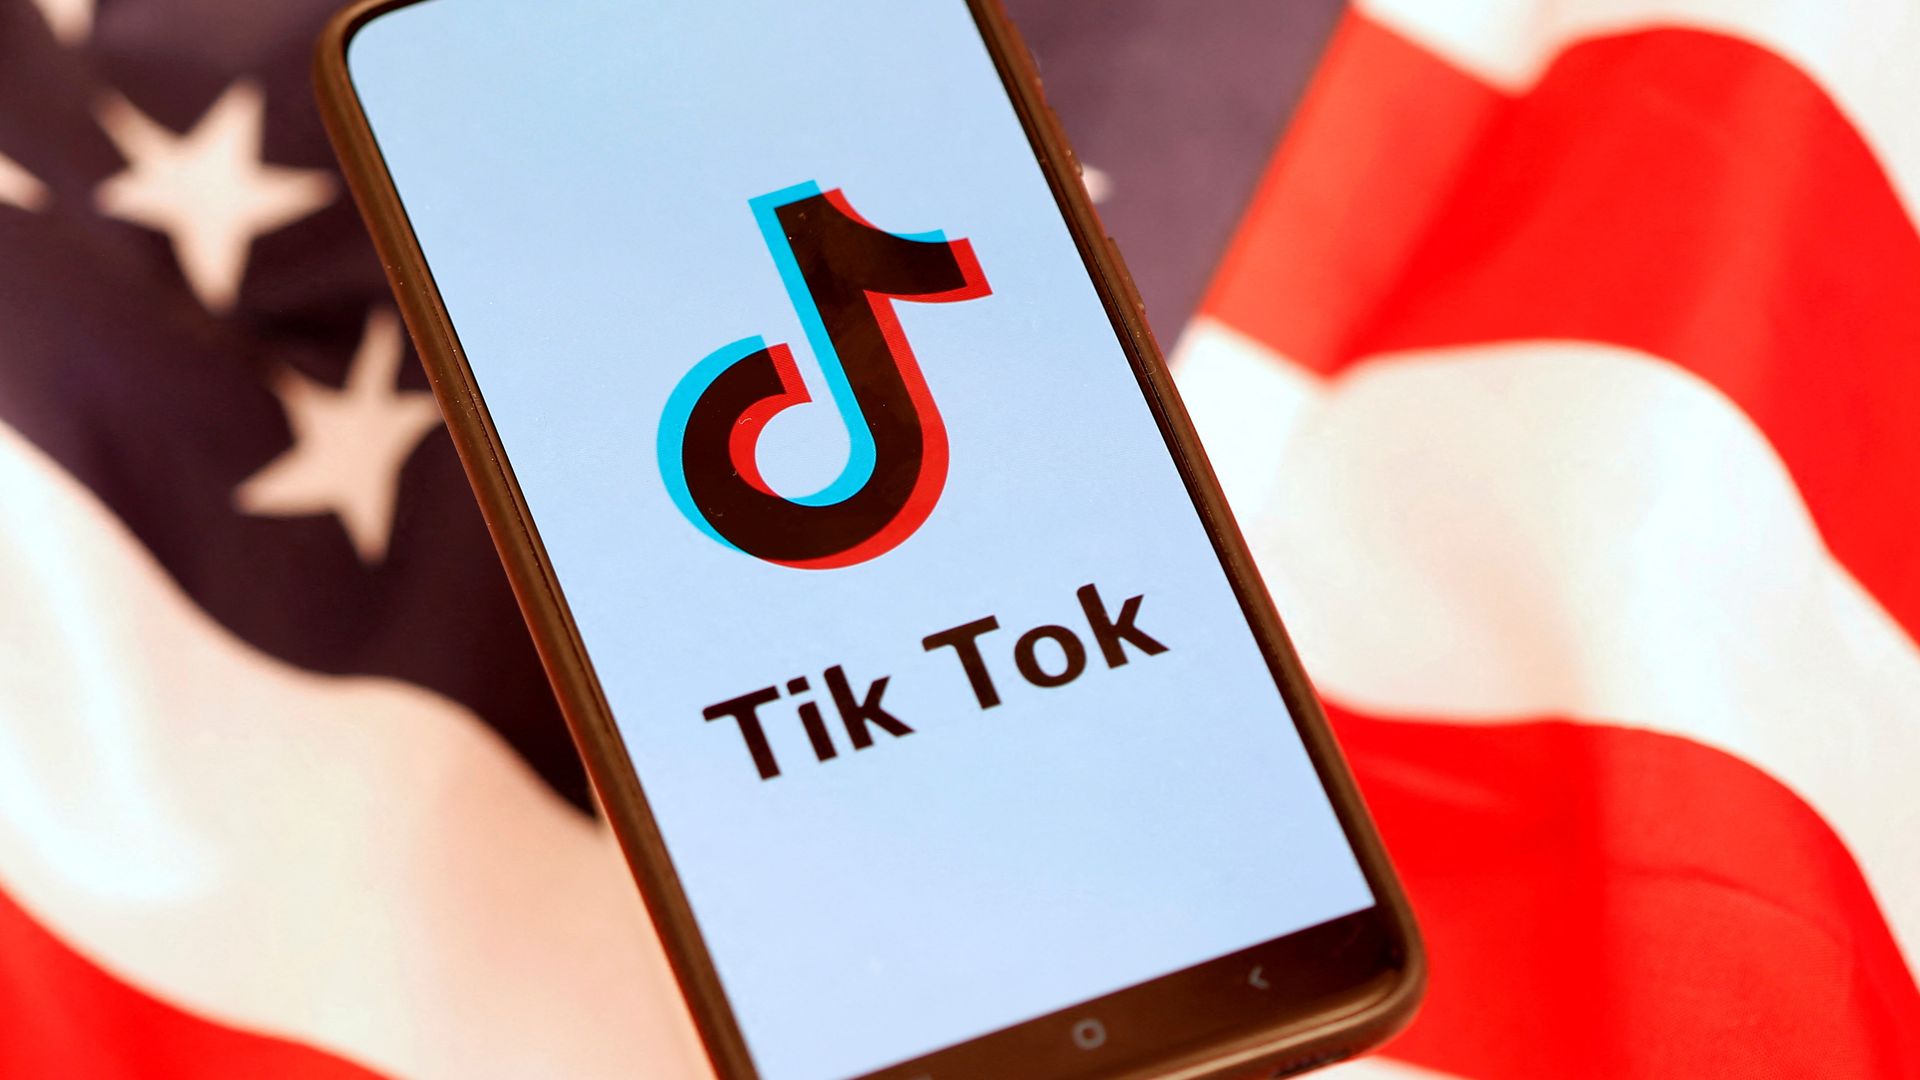 Montana's TikTok ban may violate the First Amendment, but even if it were to survive its legal challenges,.it won't be possible to enforce.